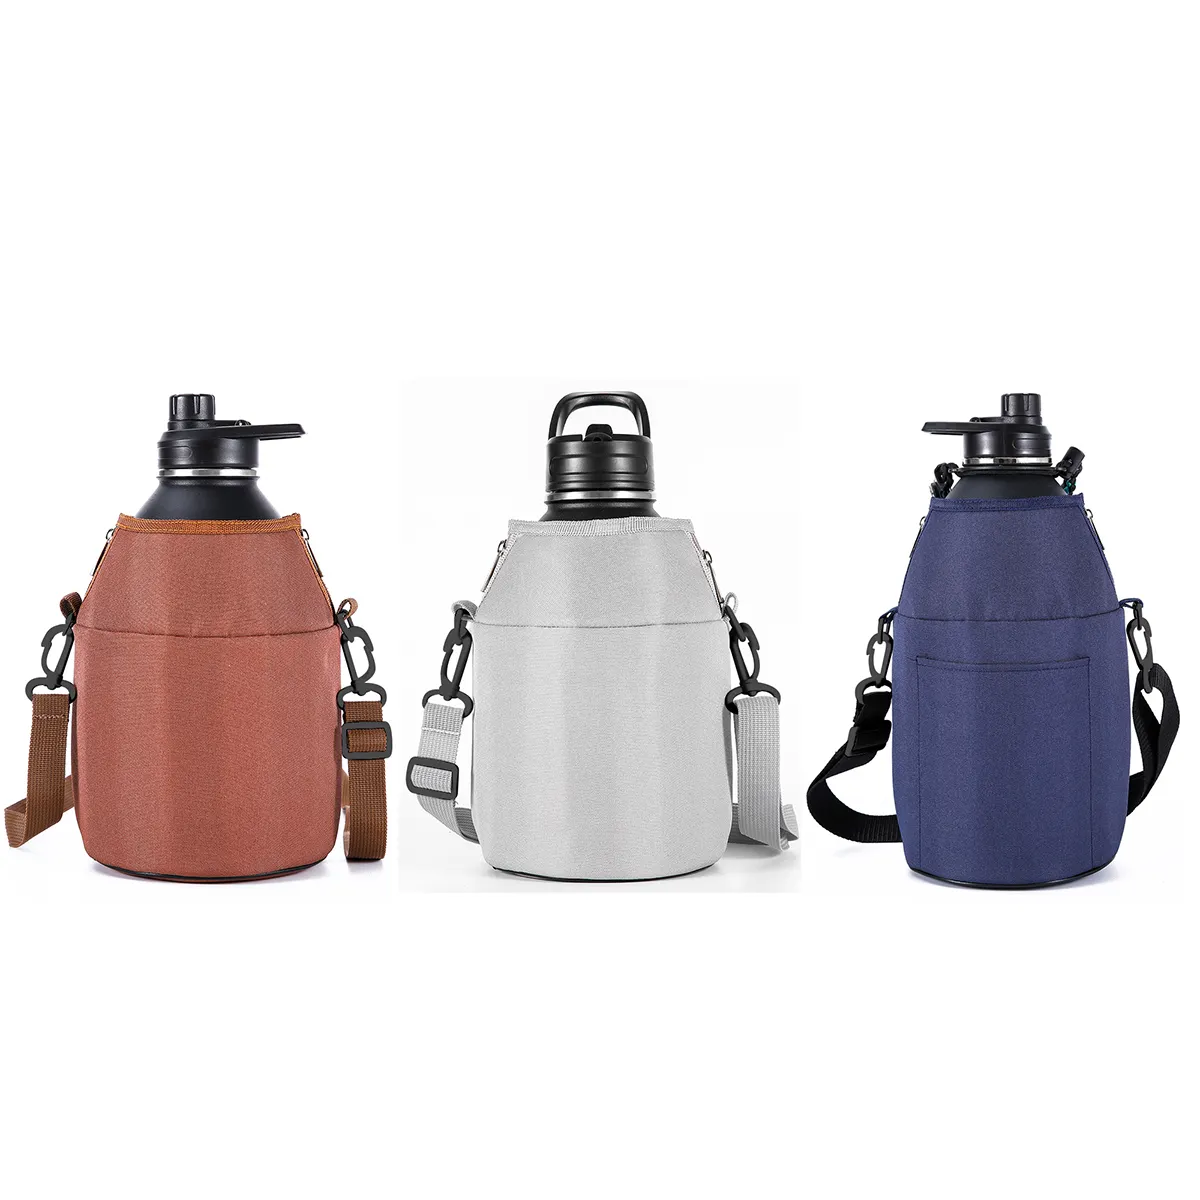 Water Bottle Carrier Holder with Shoulder Strap,Pouch, Pocket & Carrying Handle